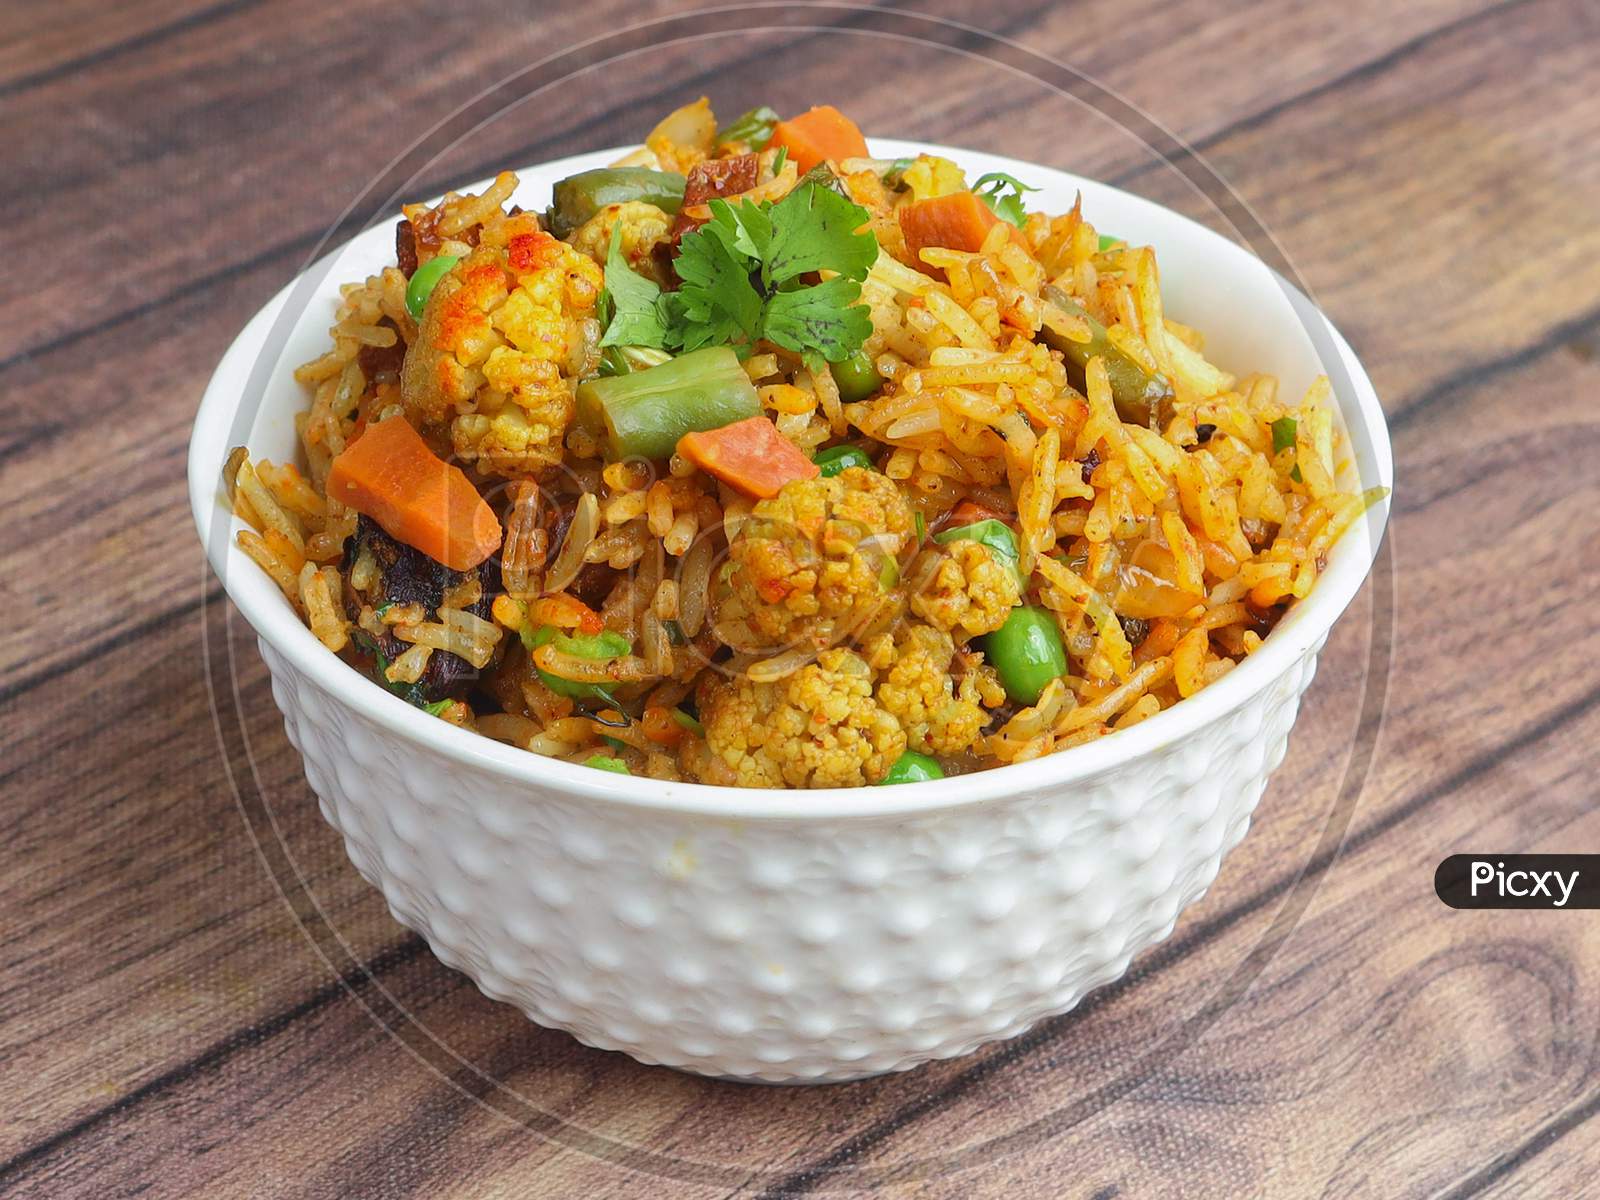 Traditional Vegetable / Veg Biryani With Mixed Veggies Served With Curry, Selective Focus